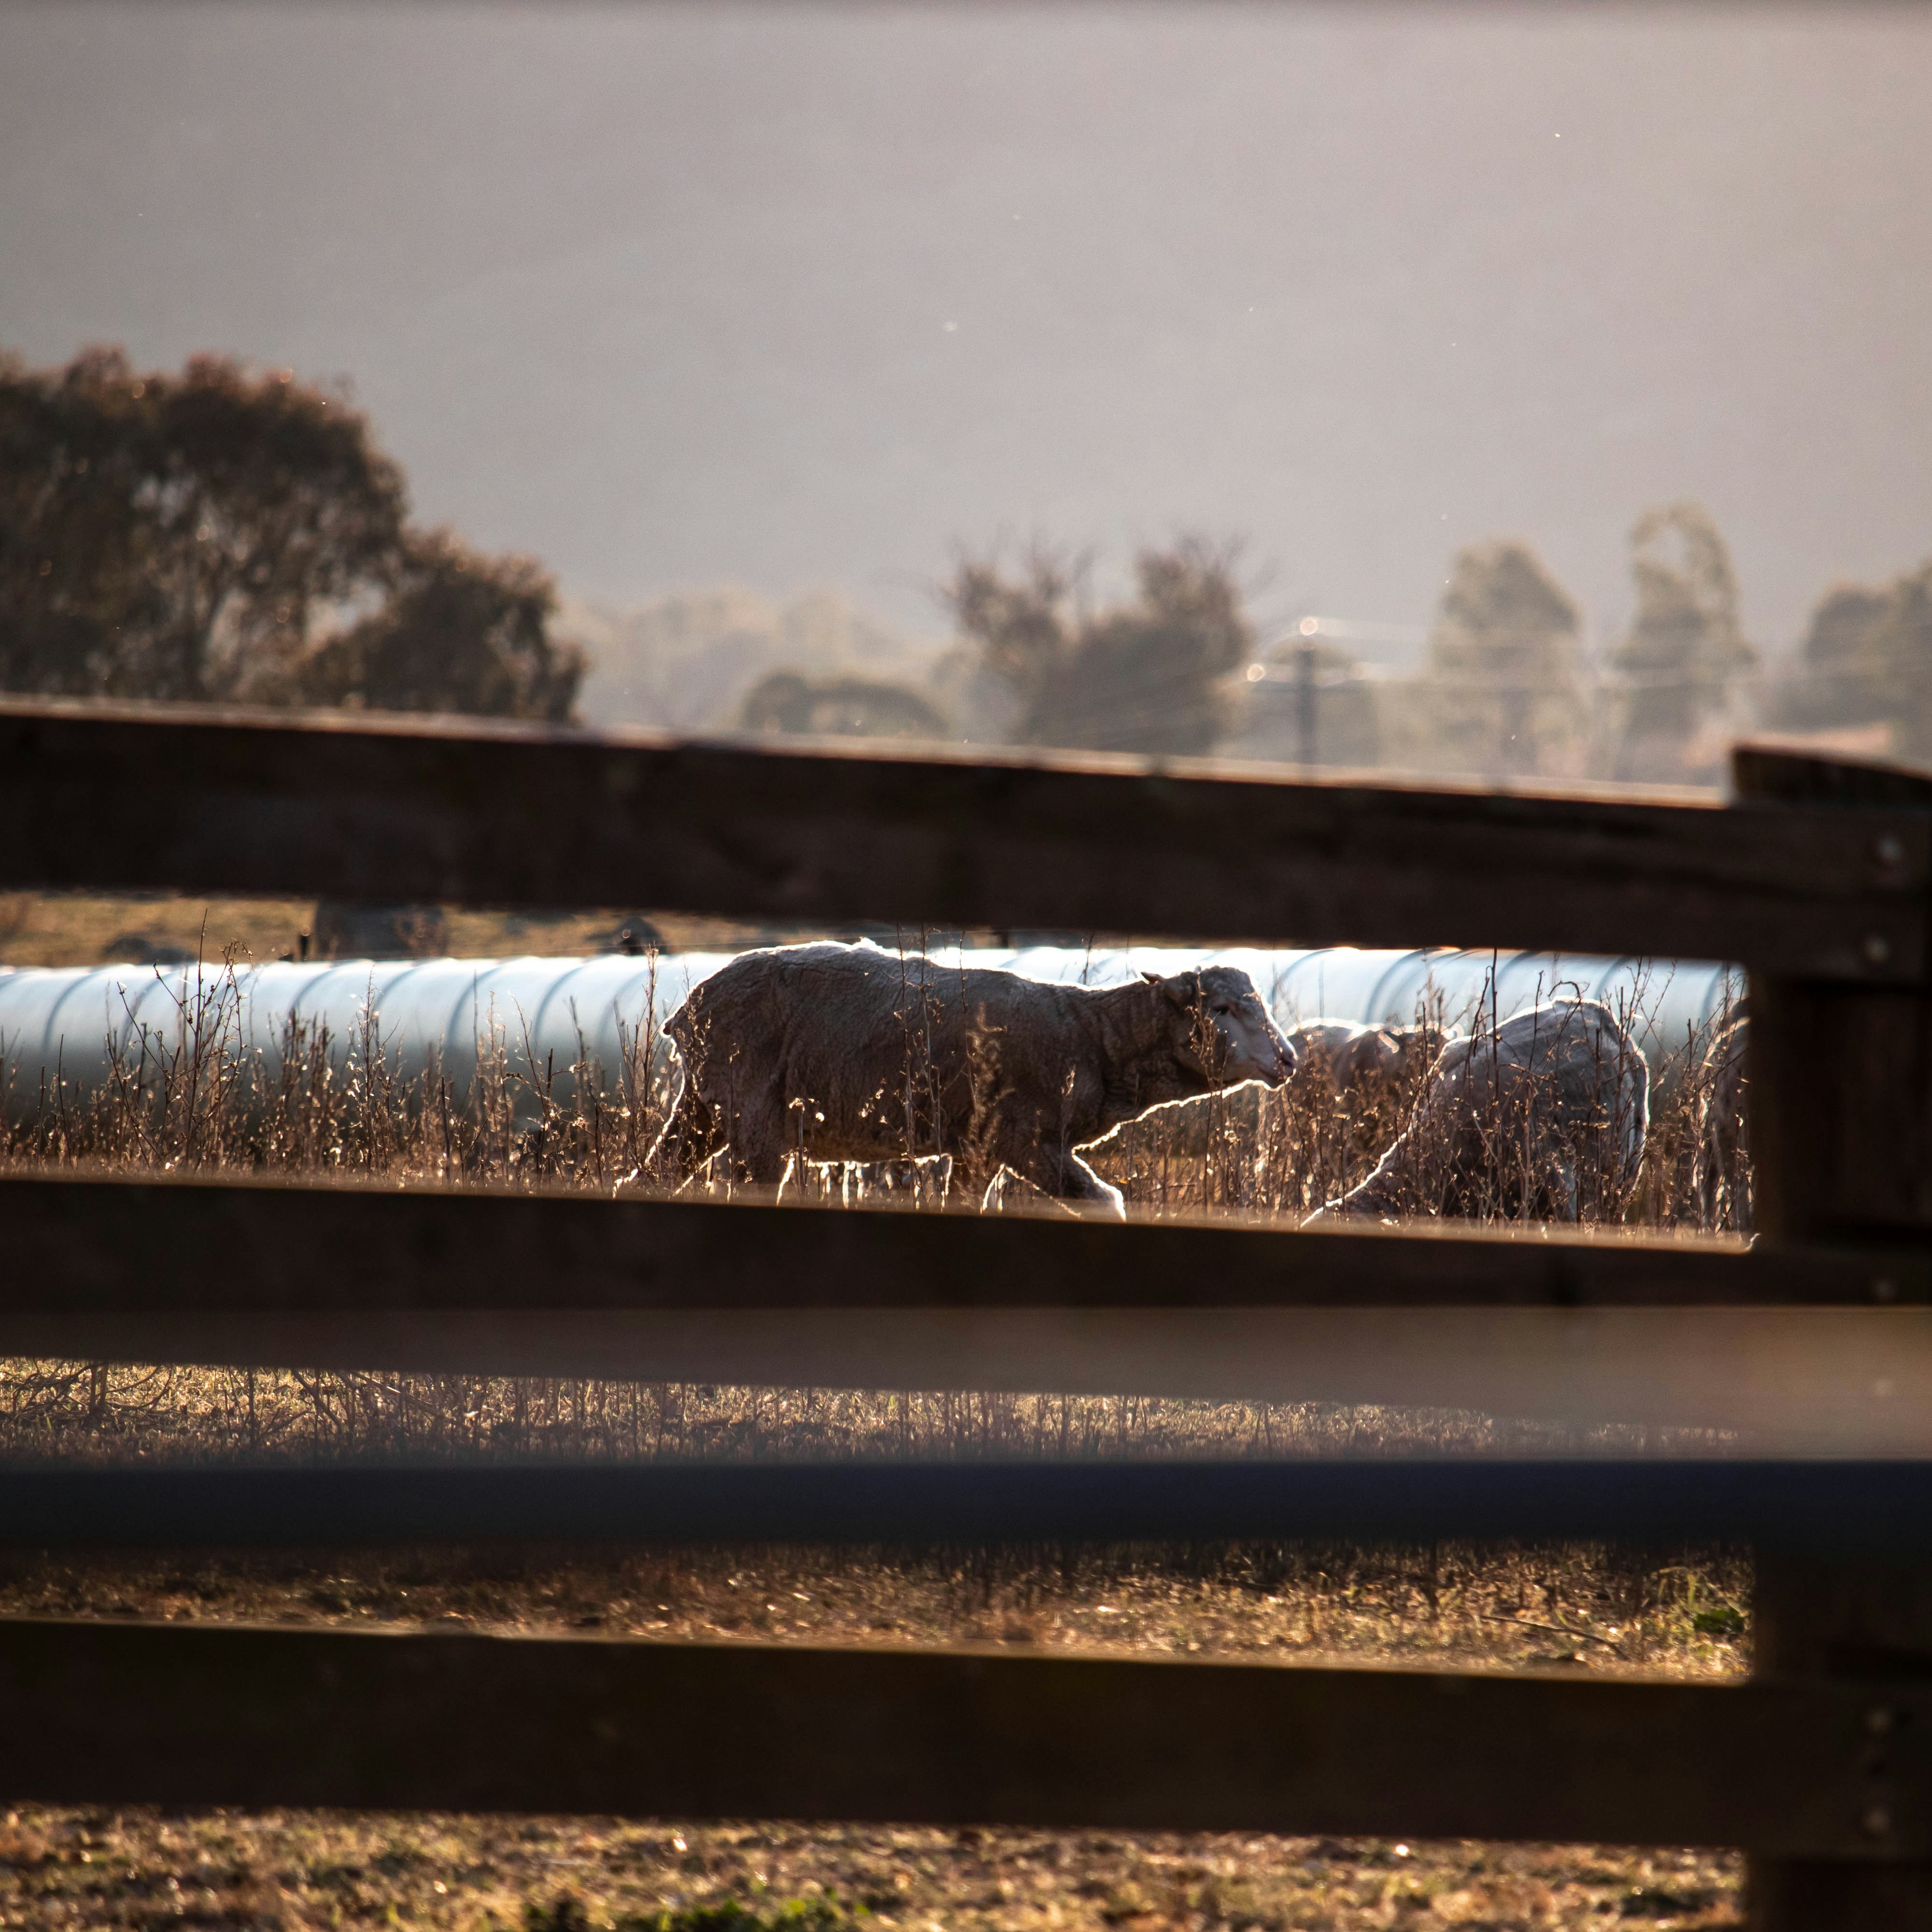 gray sheep near brown wooden fence during daytime